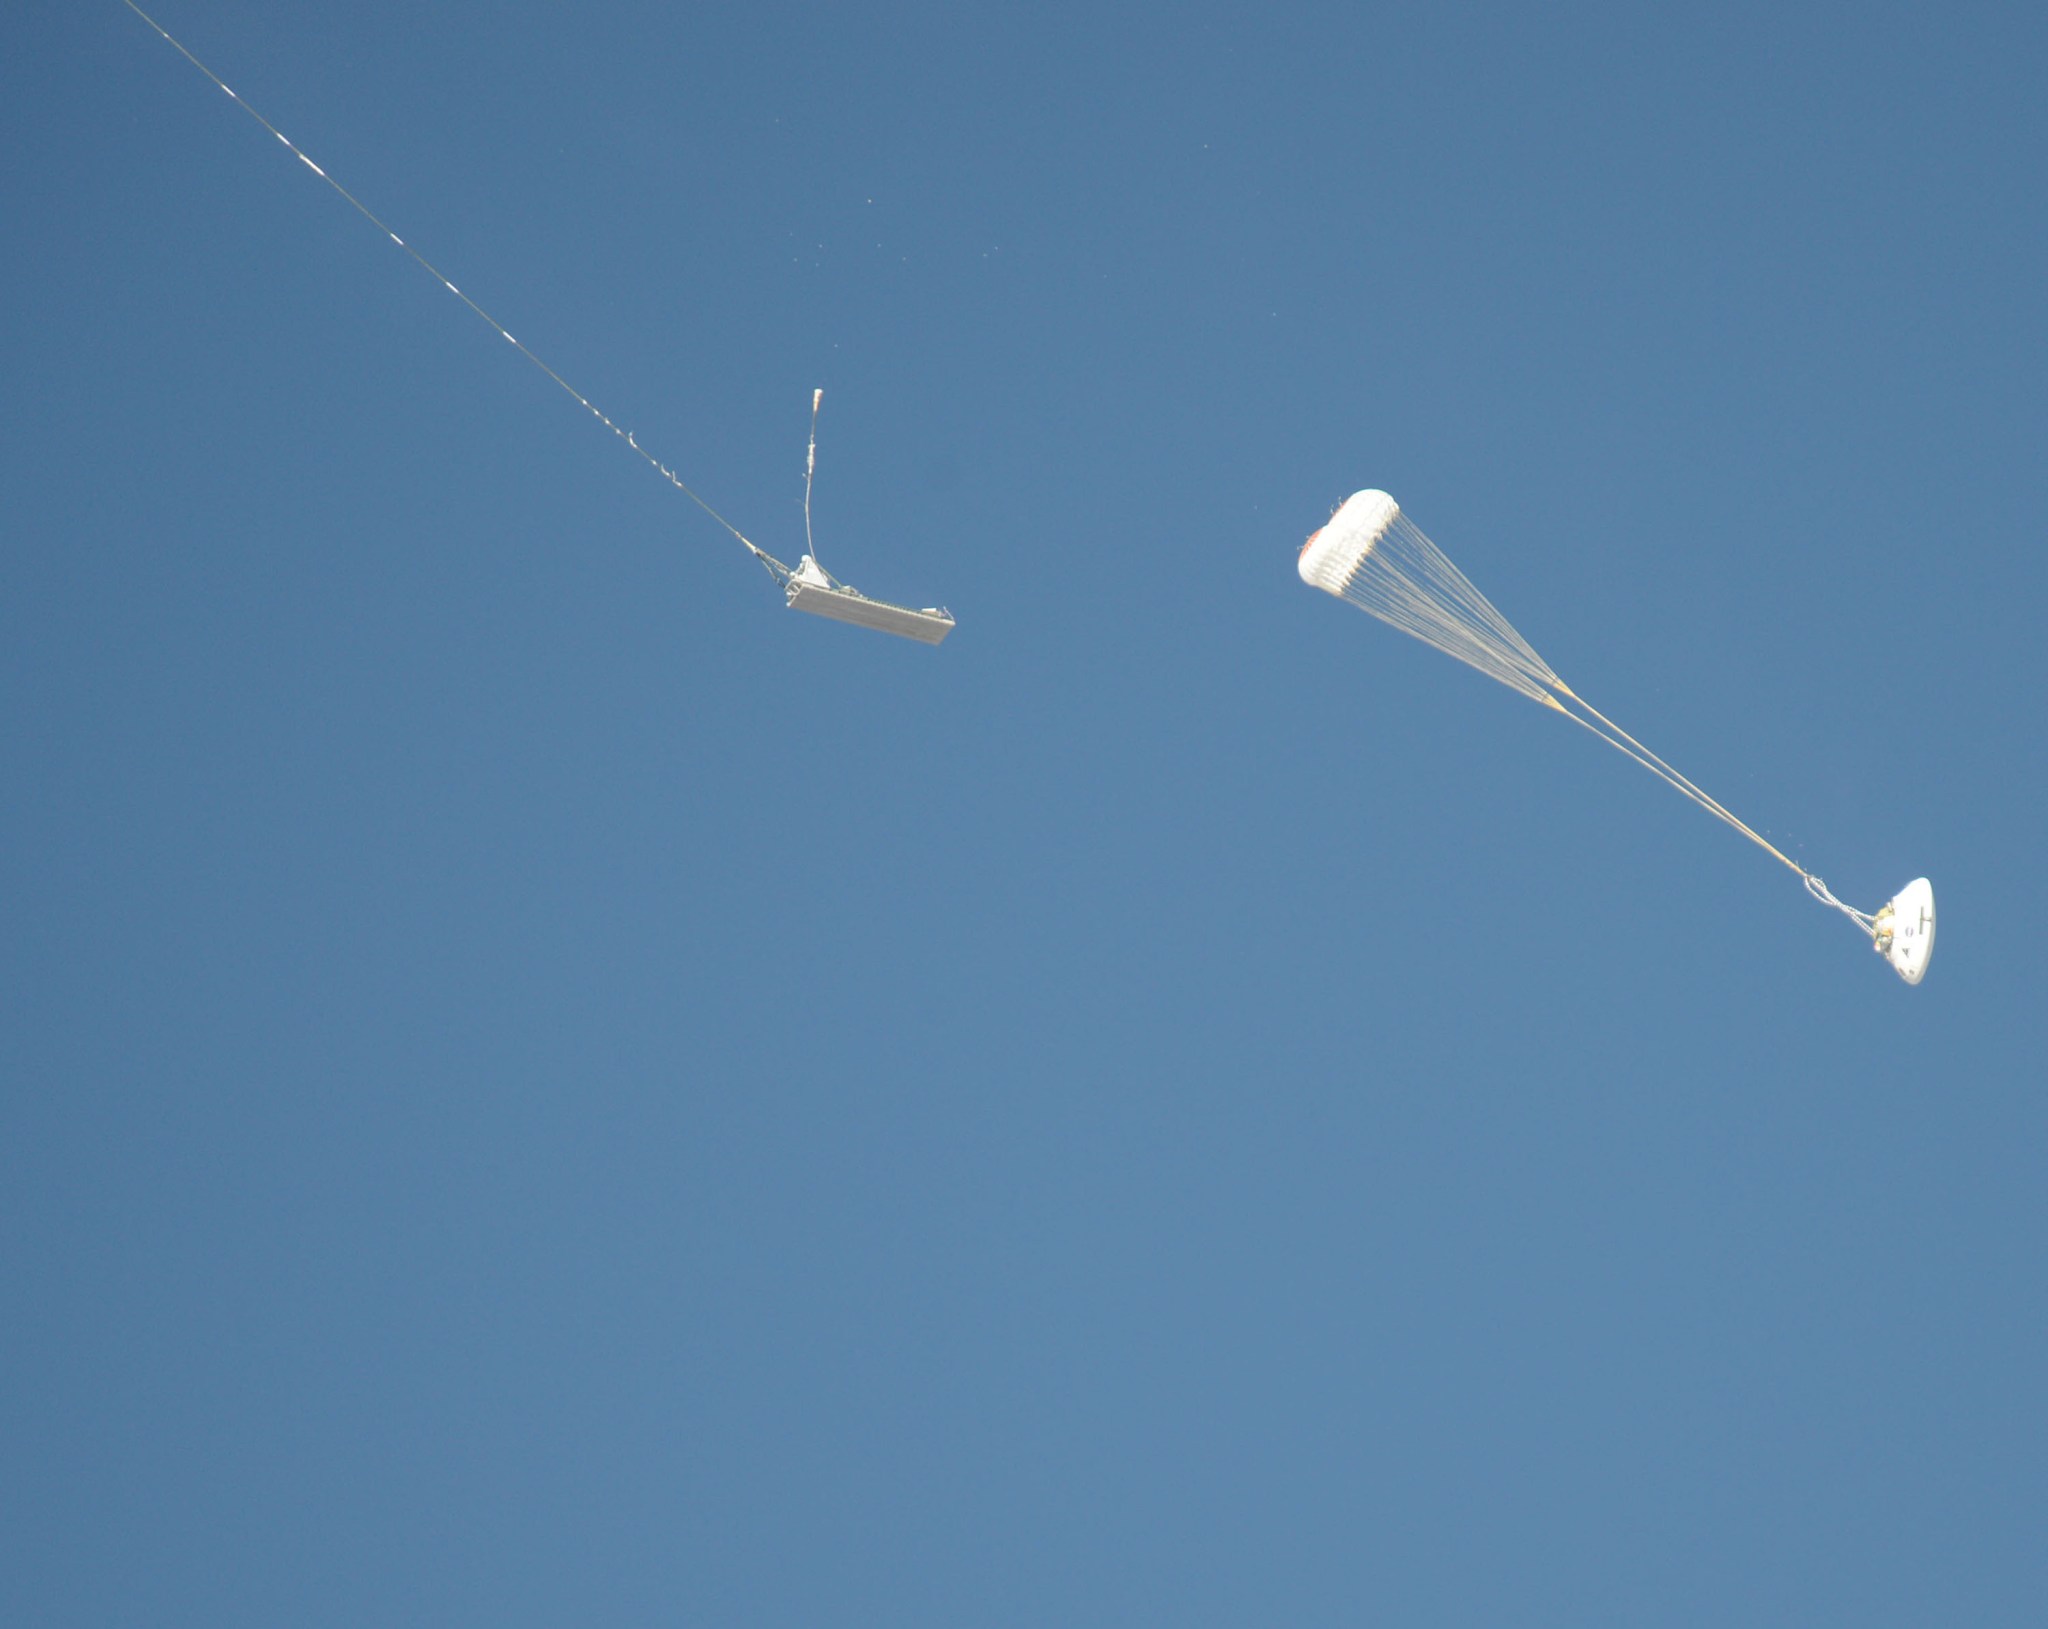 An Orion parachute test enters a new phase following separation from a platform.